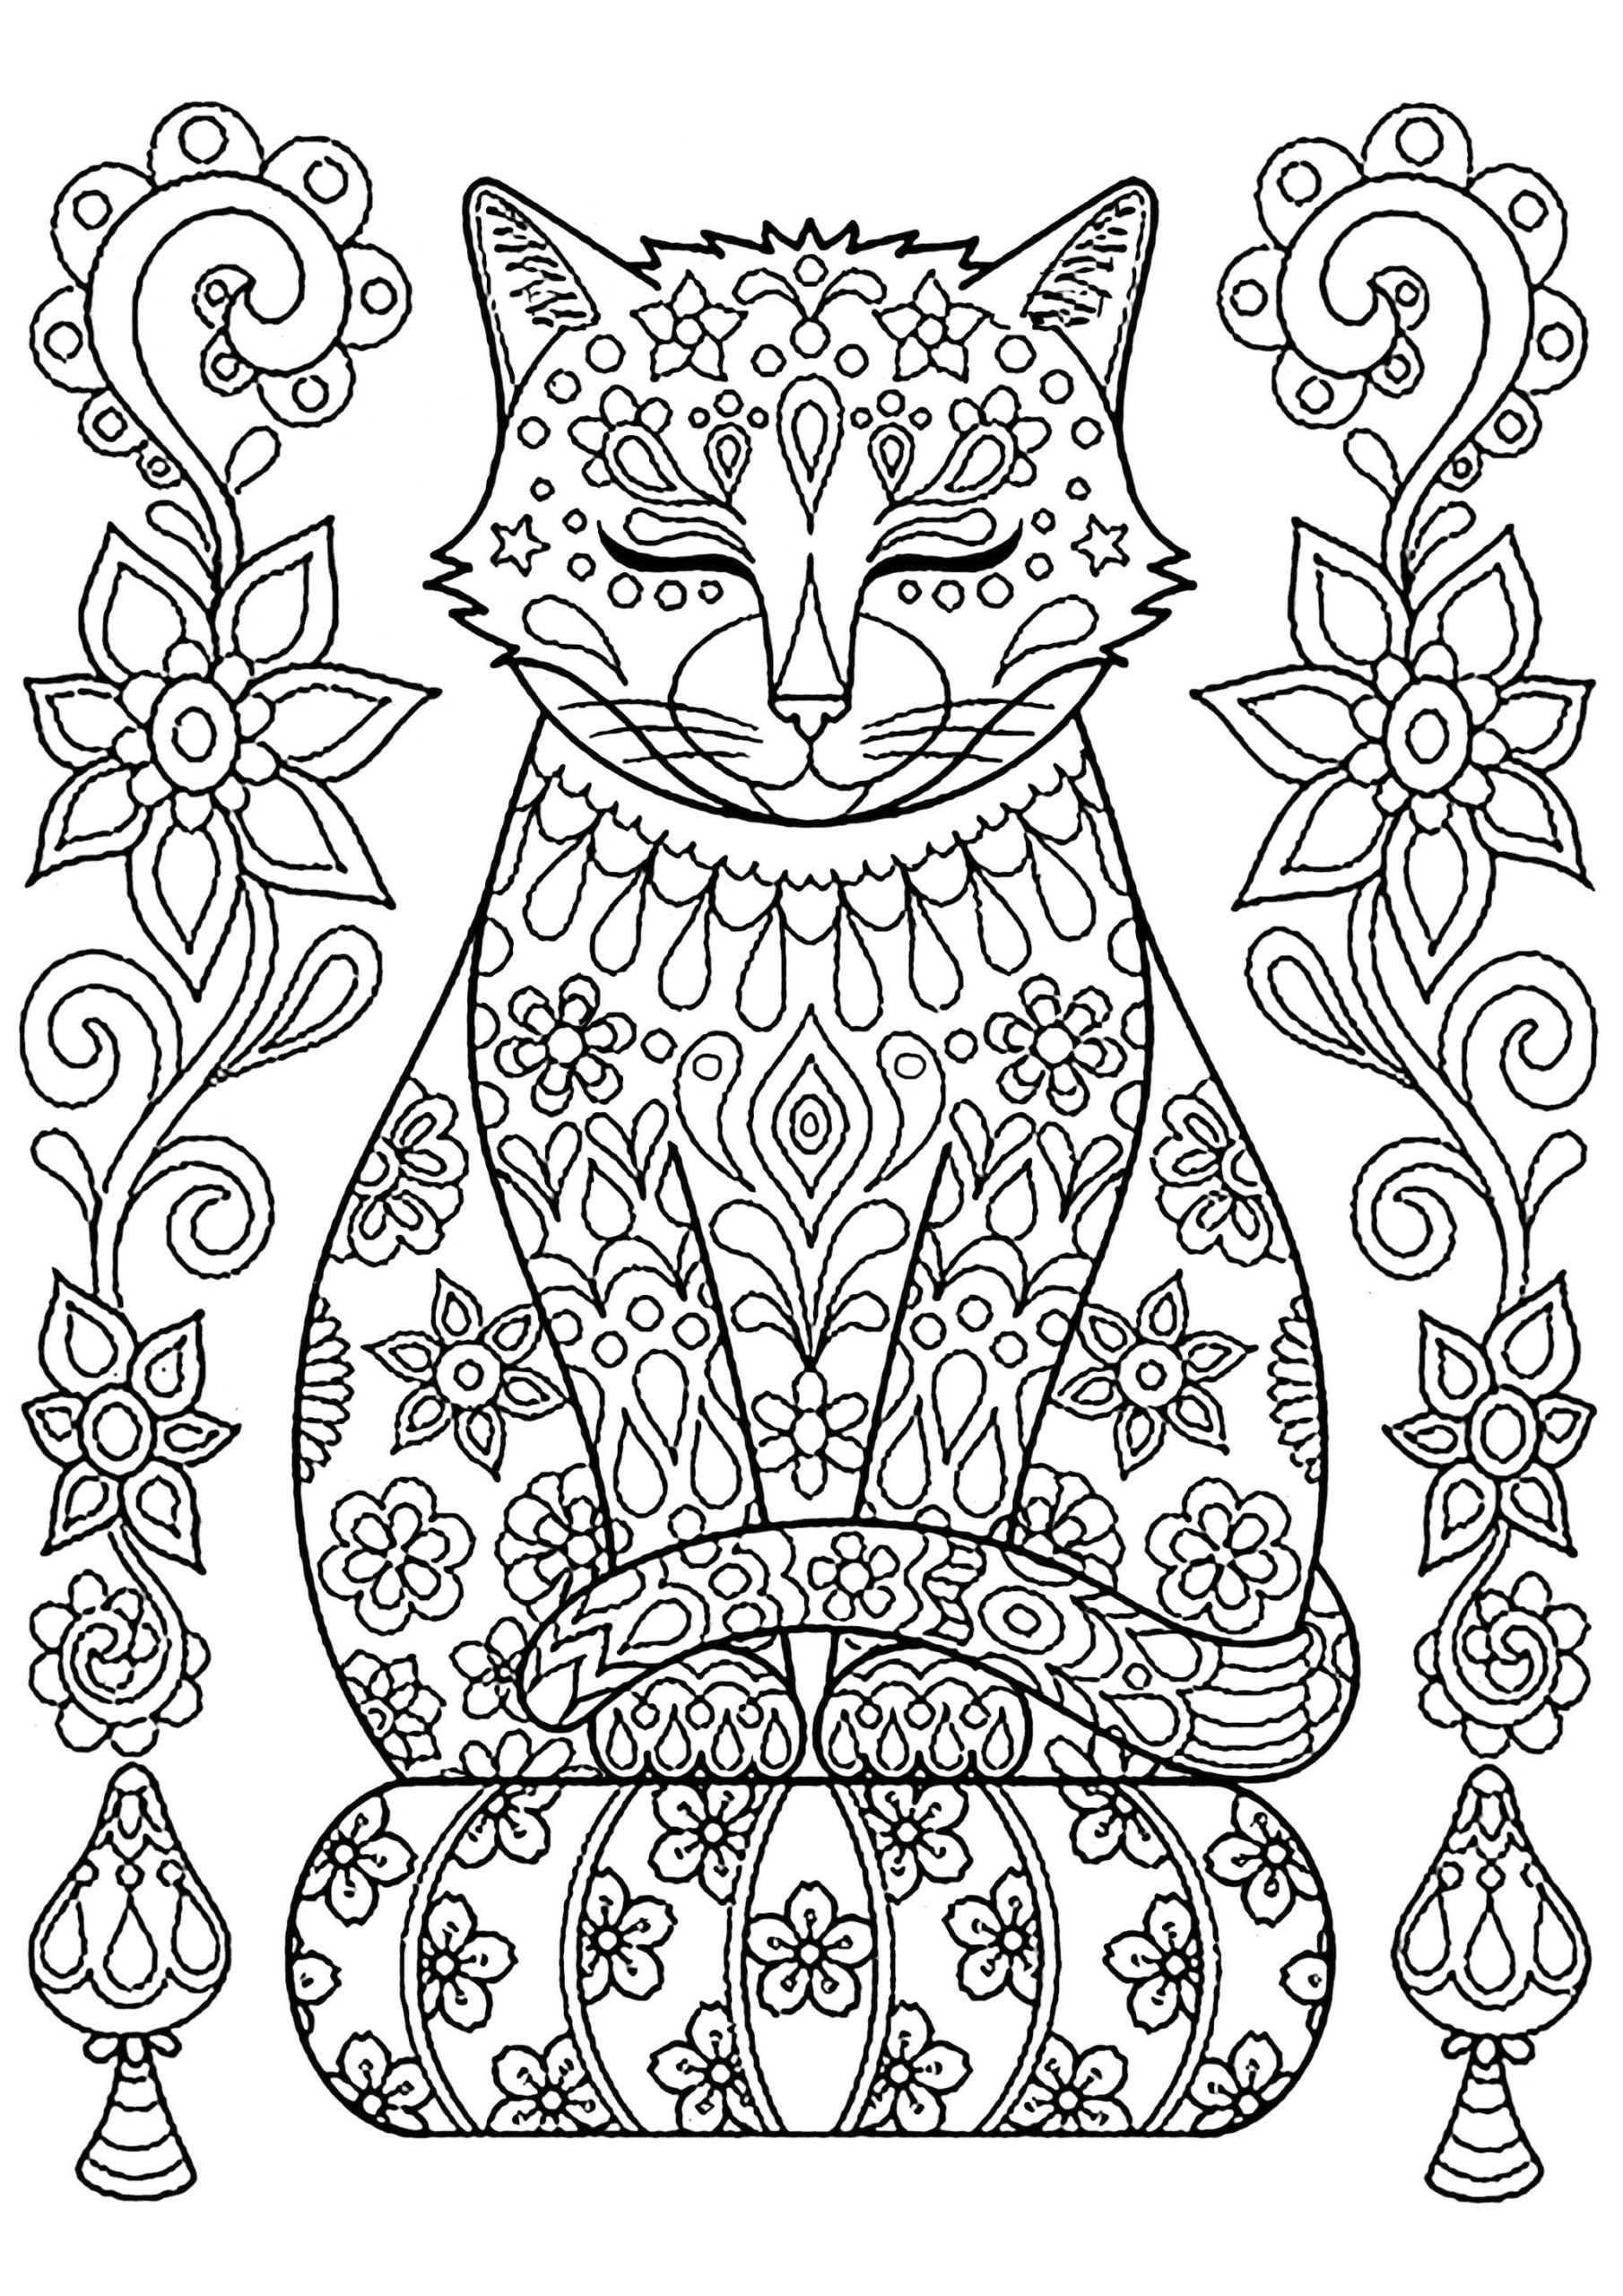 20+ Free Printable Adult Coloring Pages Cats   EverFreeColoring.com